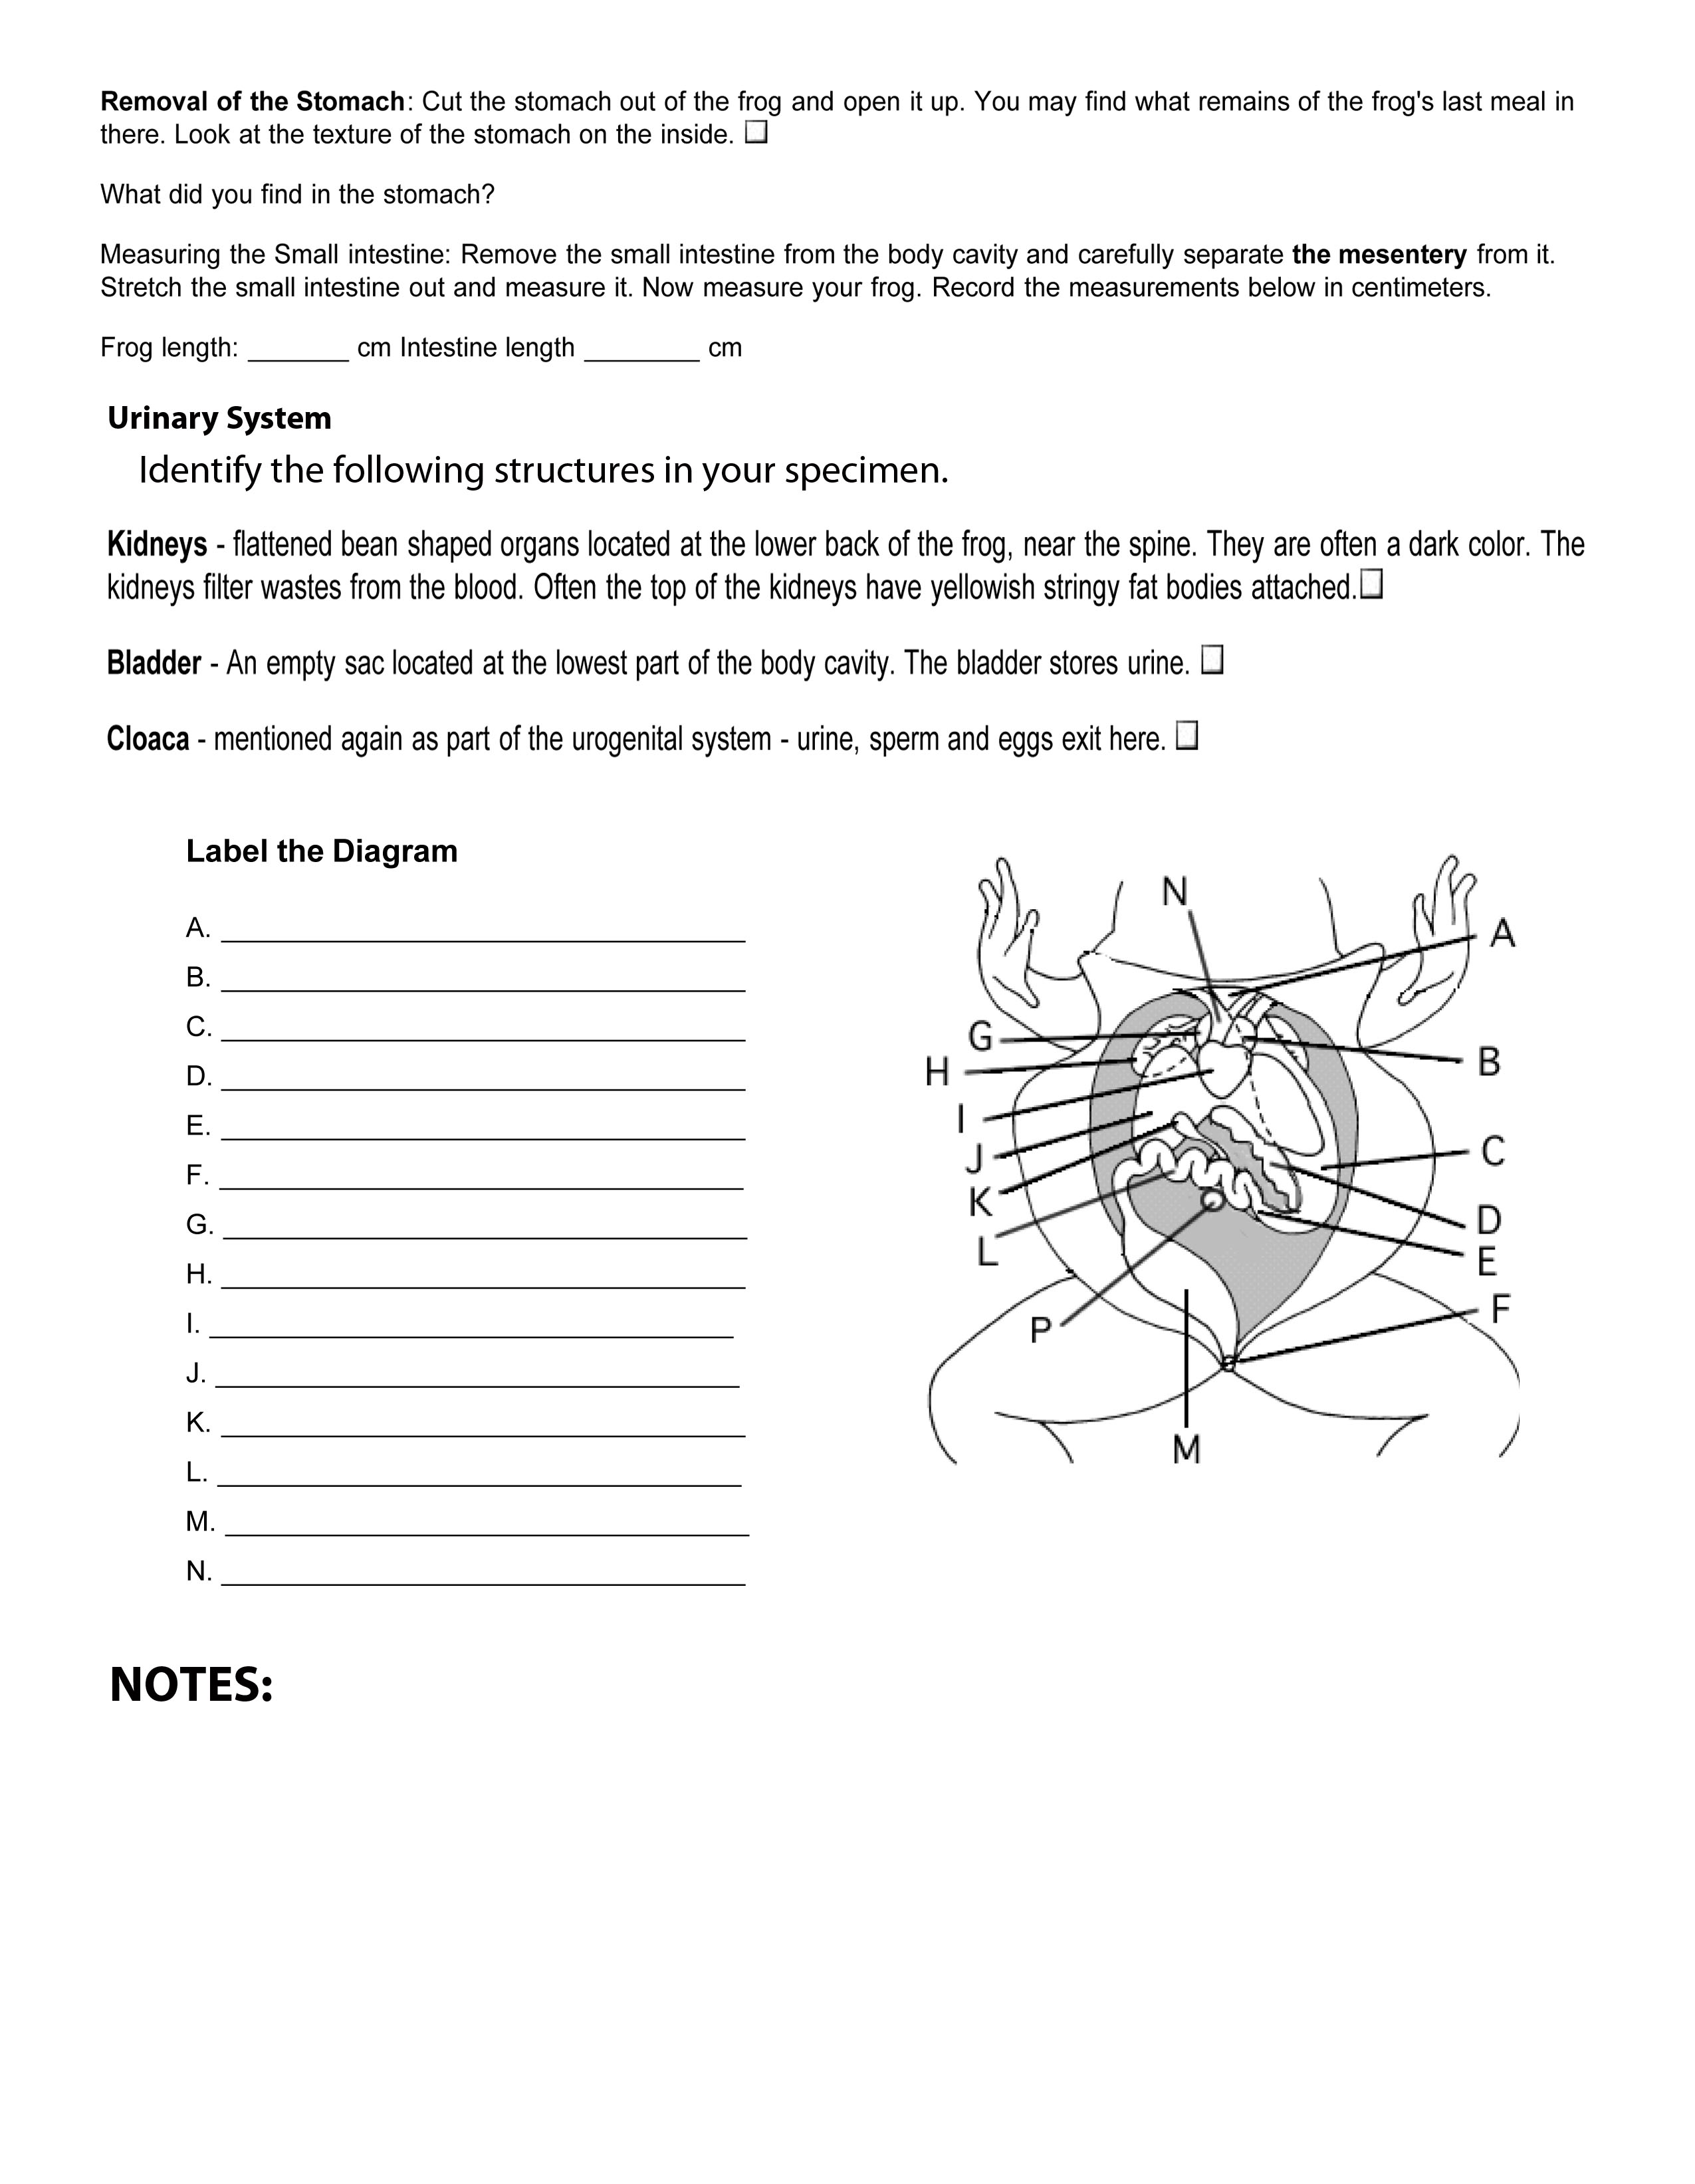 frog-dissection-lab-worksheet-answers-free-download-goodimg-co